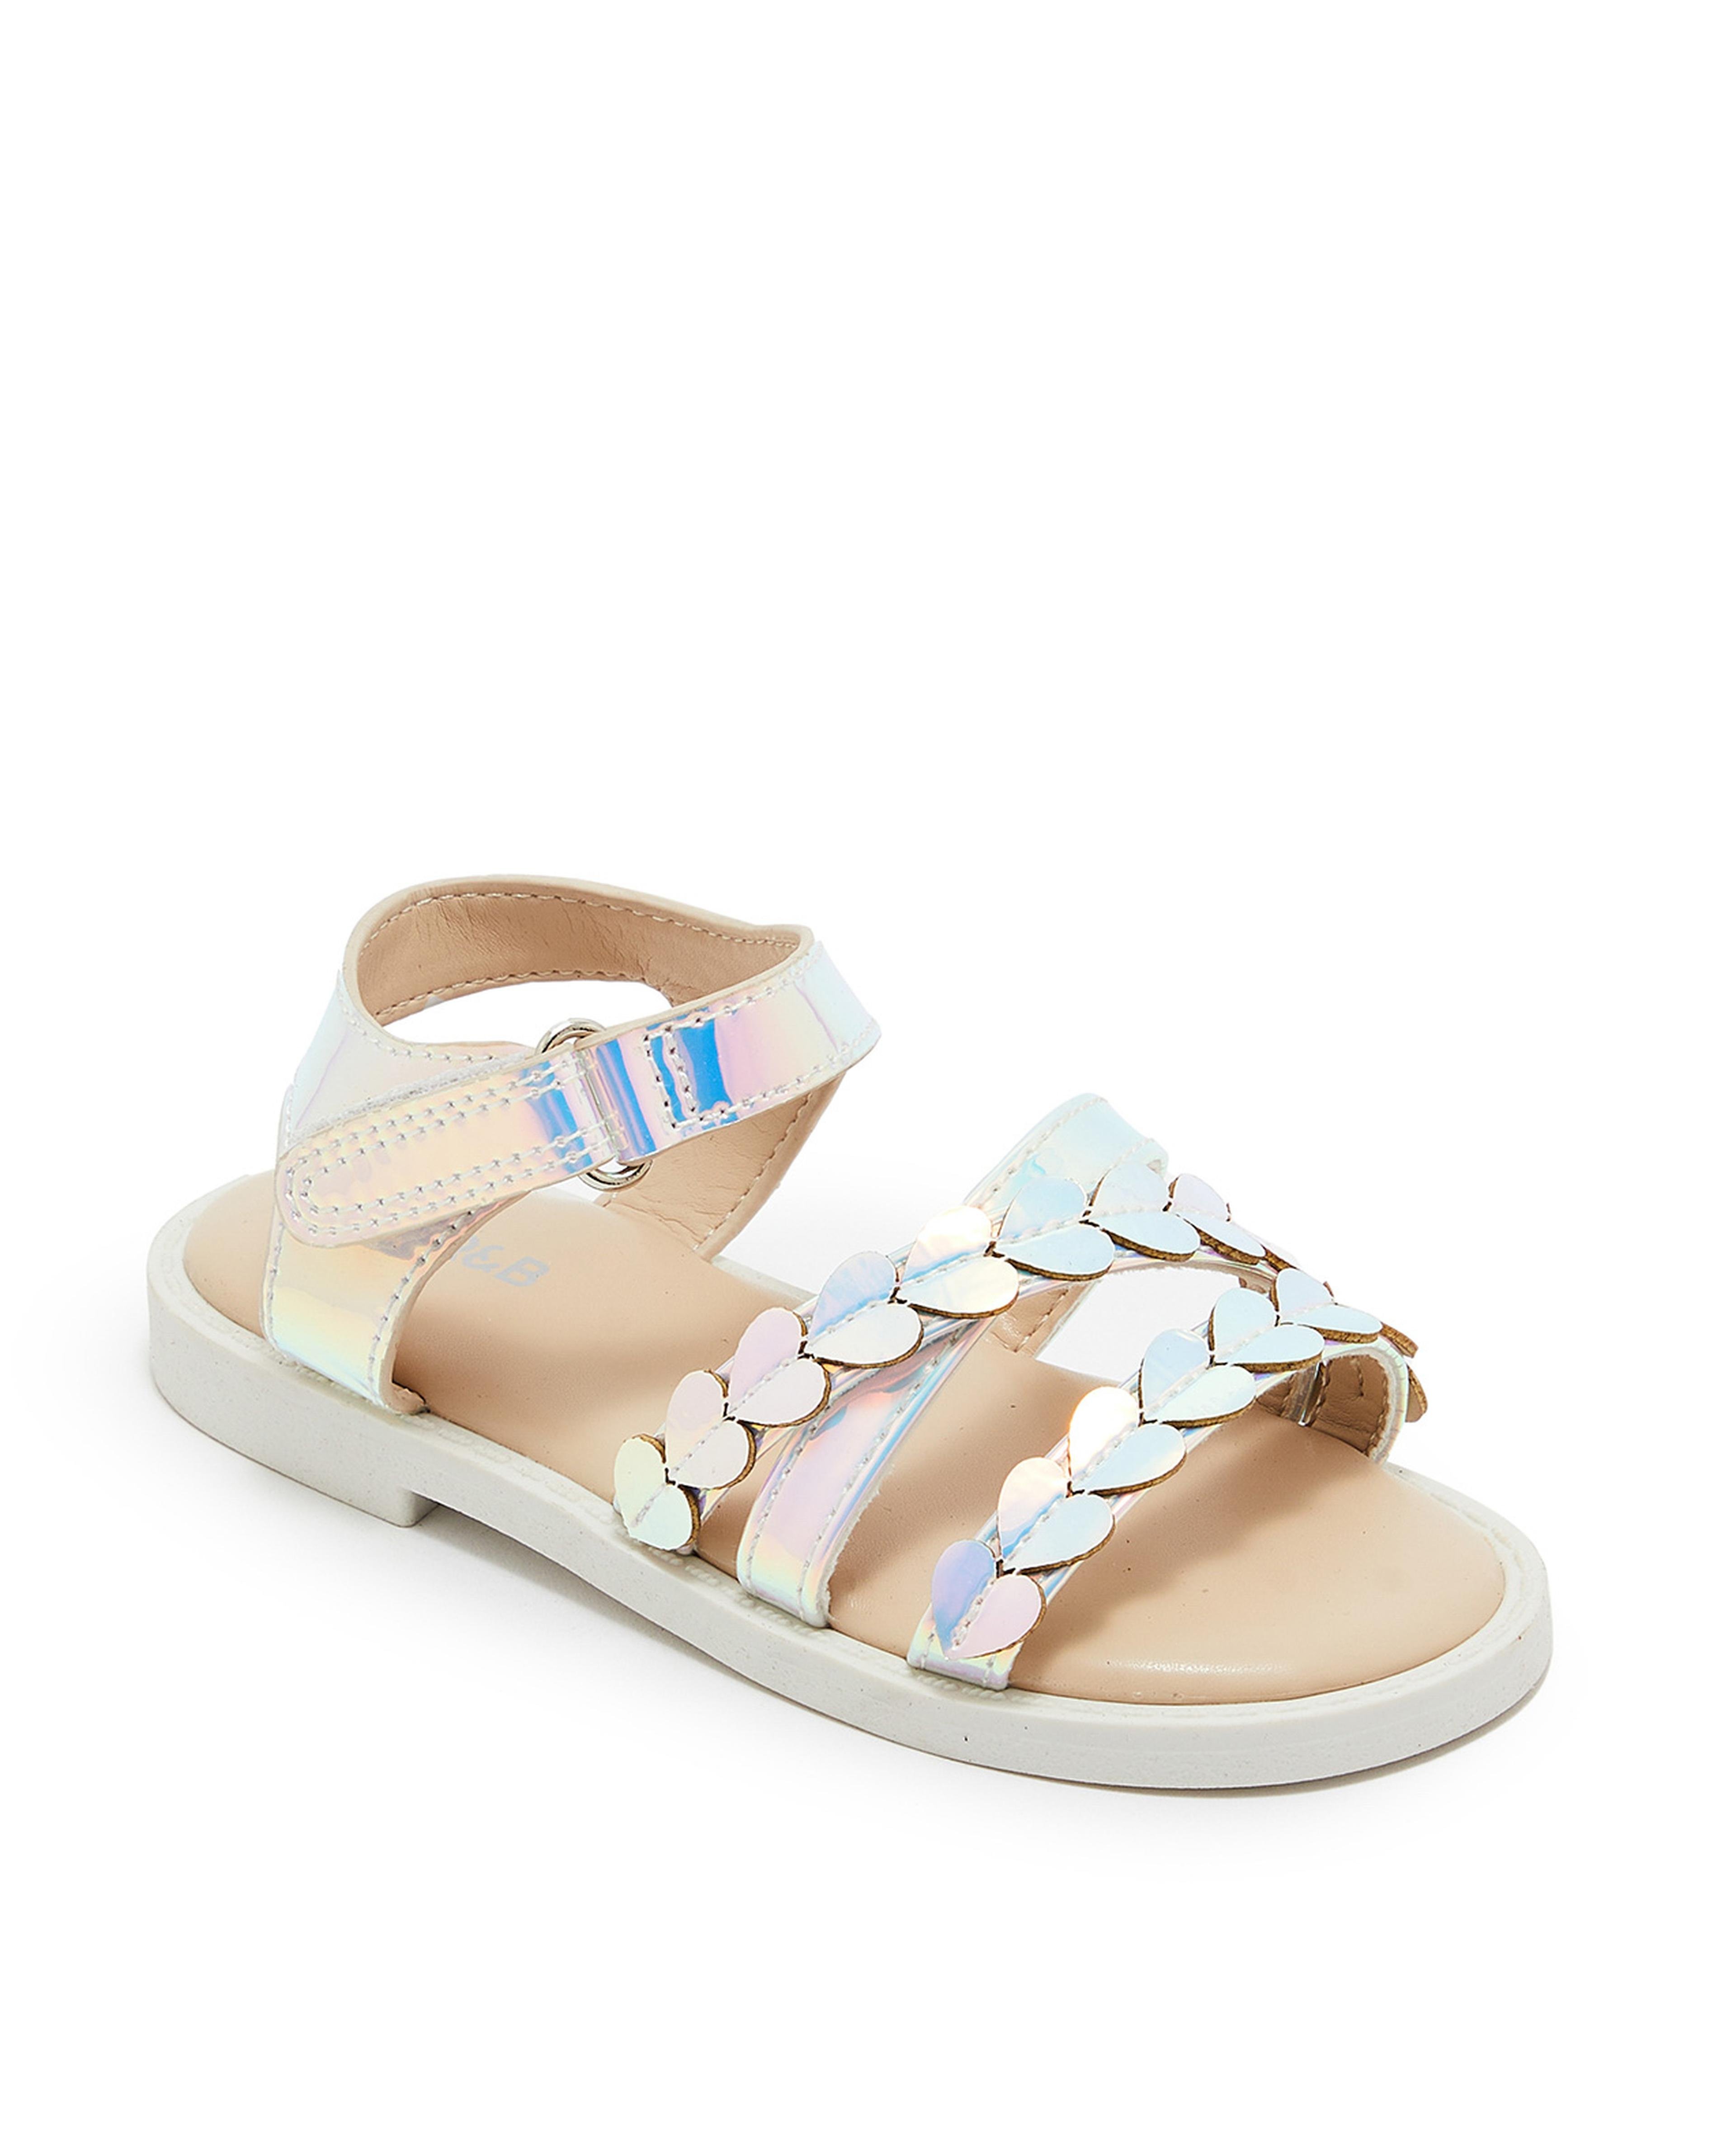 Holographic Sandals with Velcro Closure